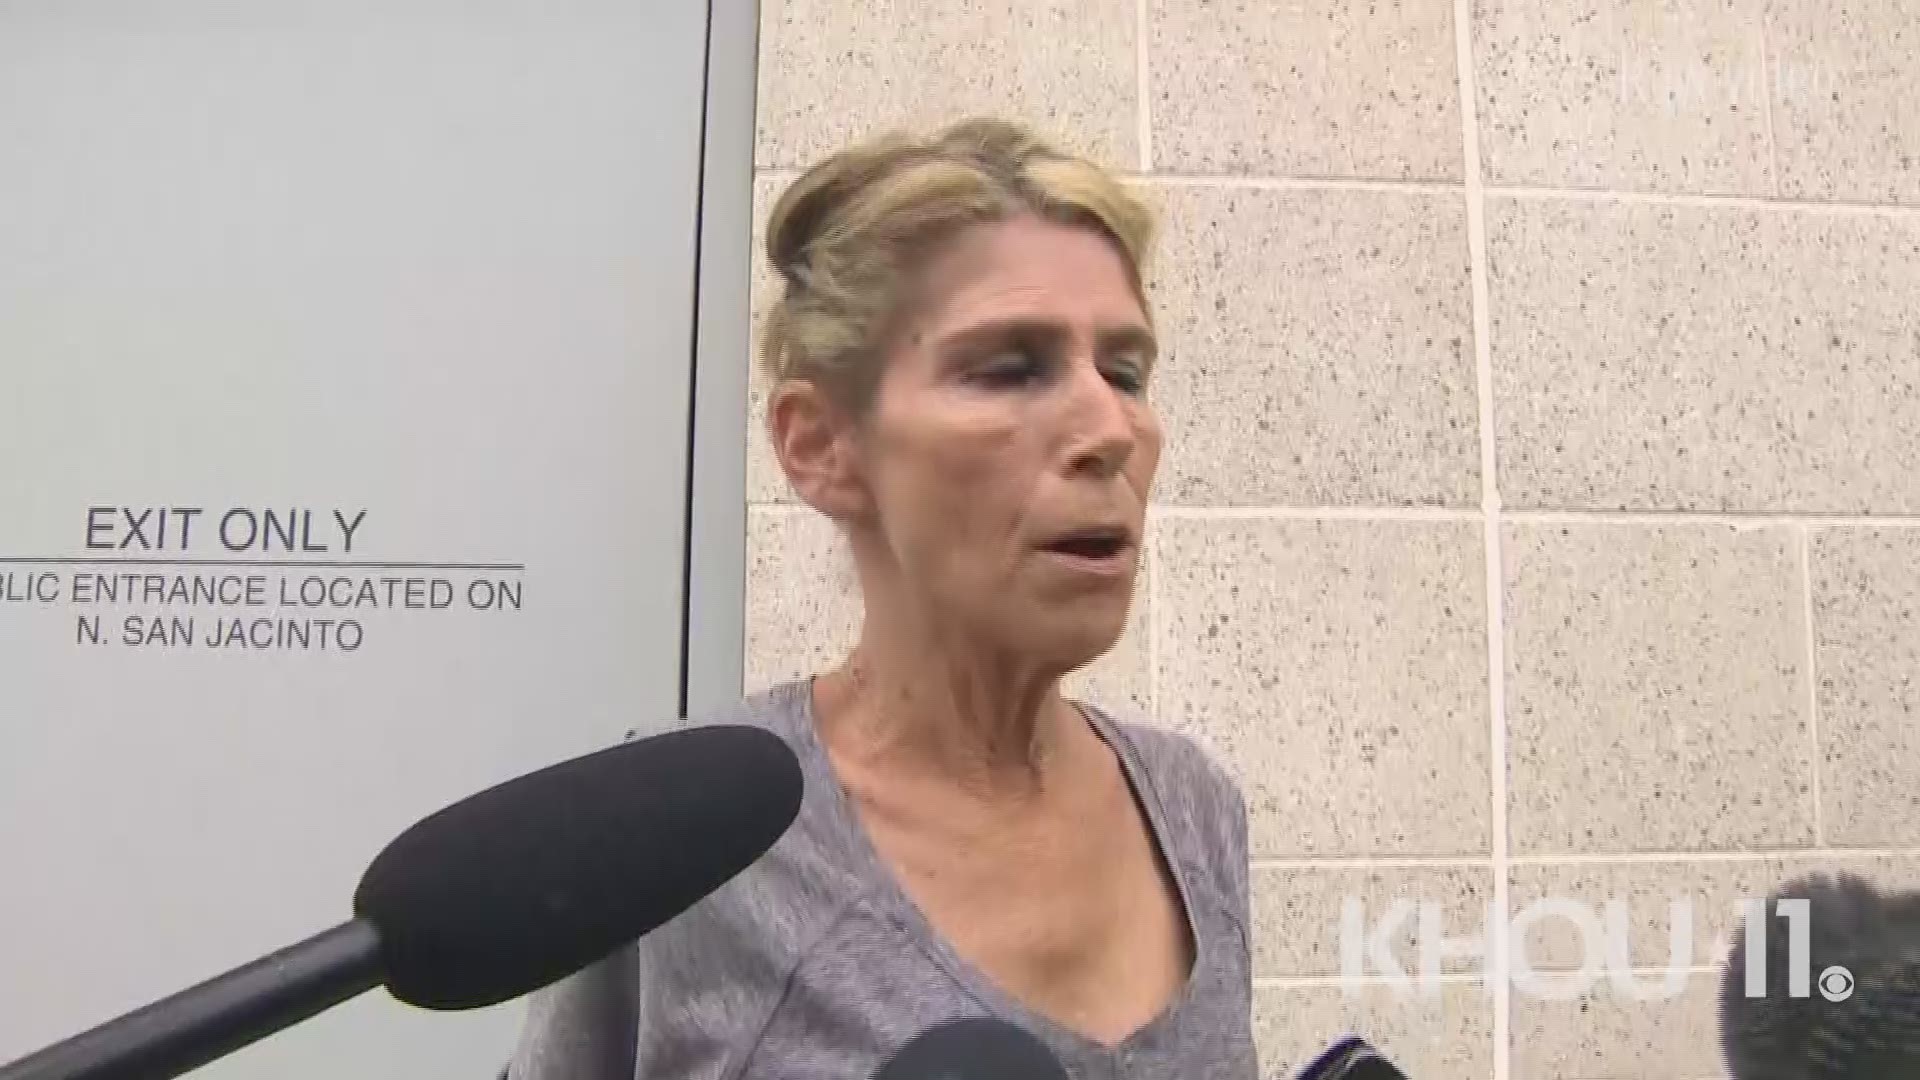 Linda Sue Godejohn speaks to the media after a court appearance for her arrest the day before | May 31, 2019